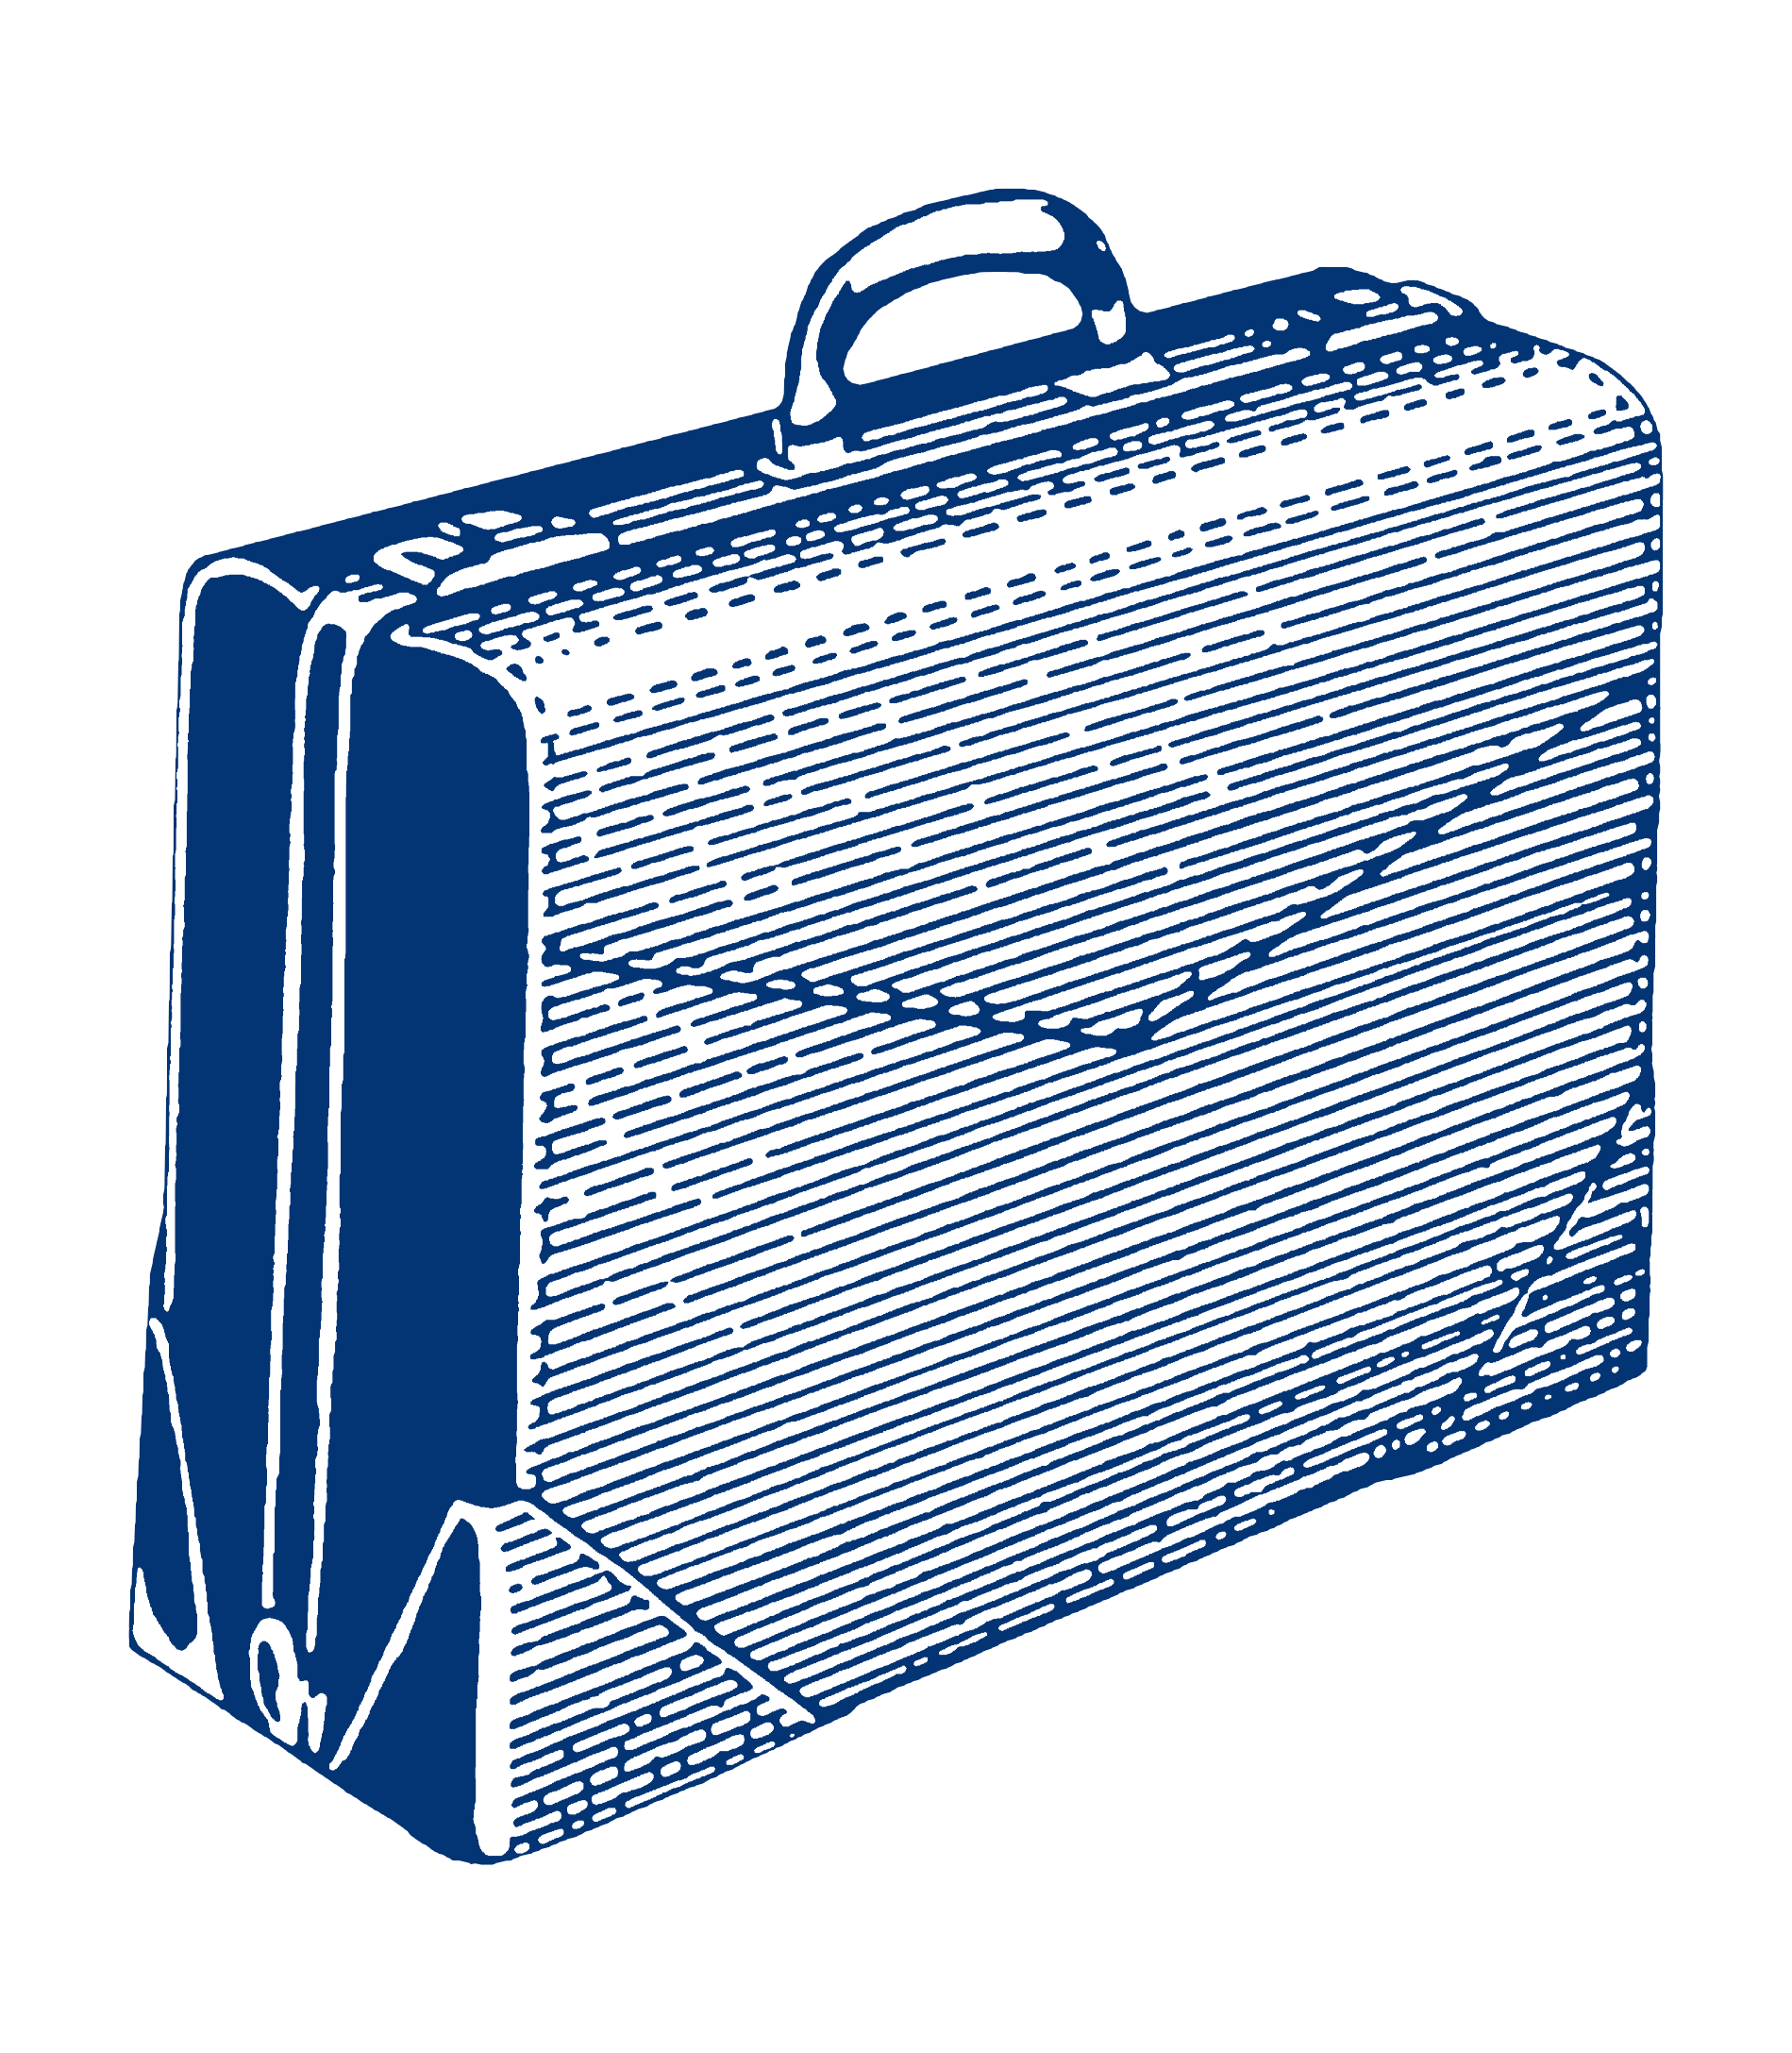 Illustration of a briefcase